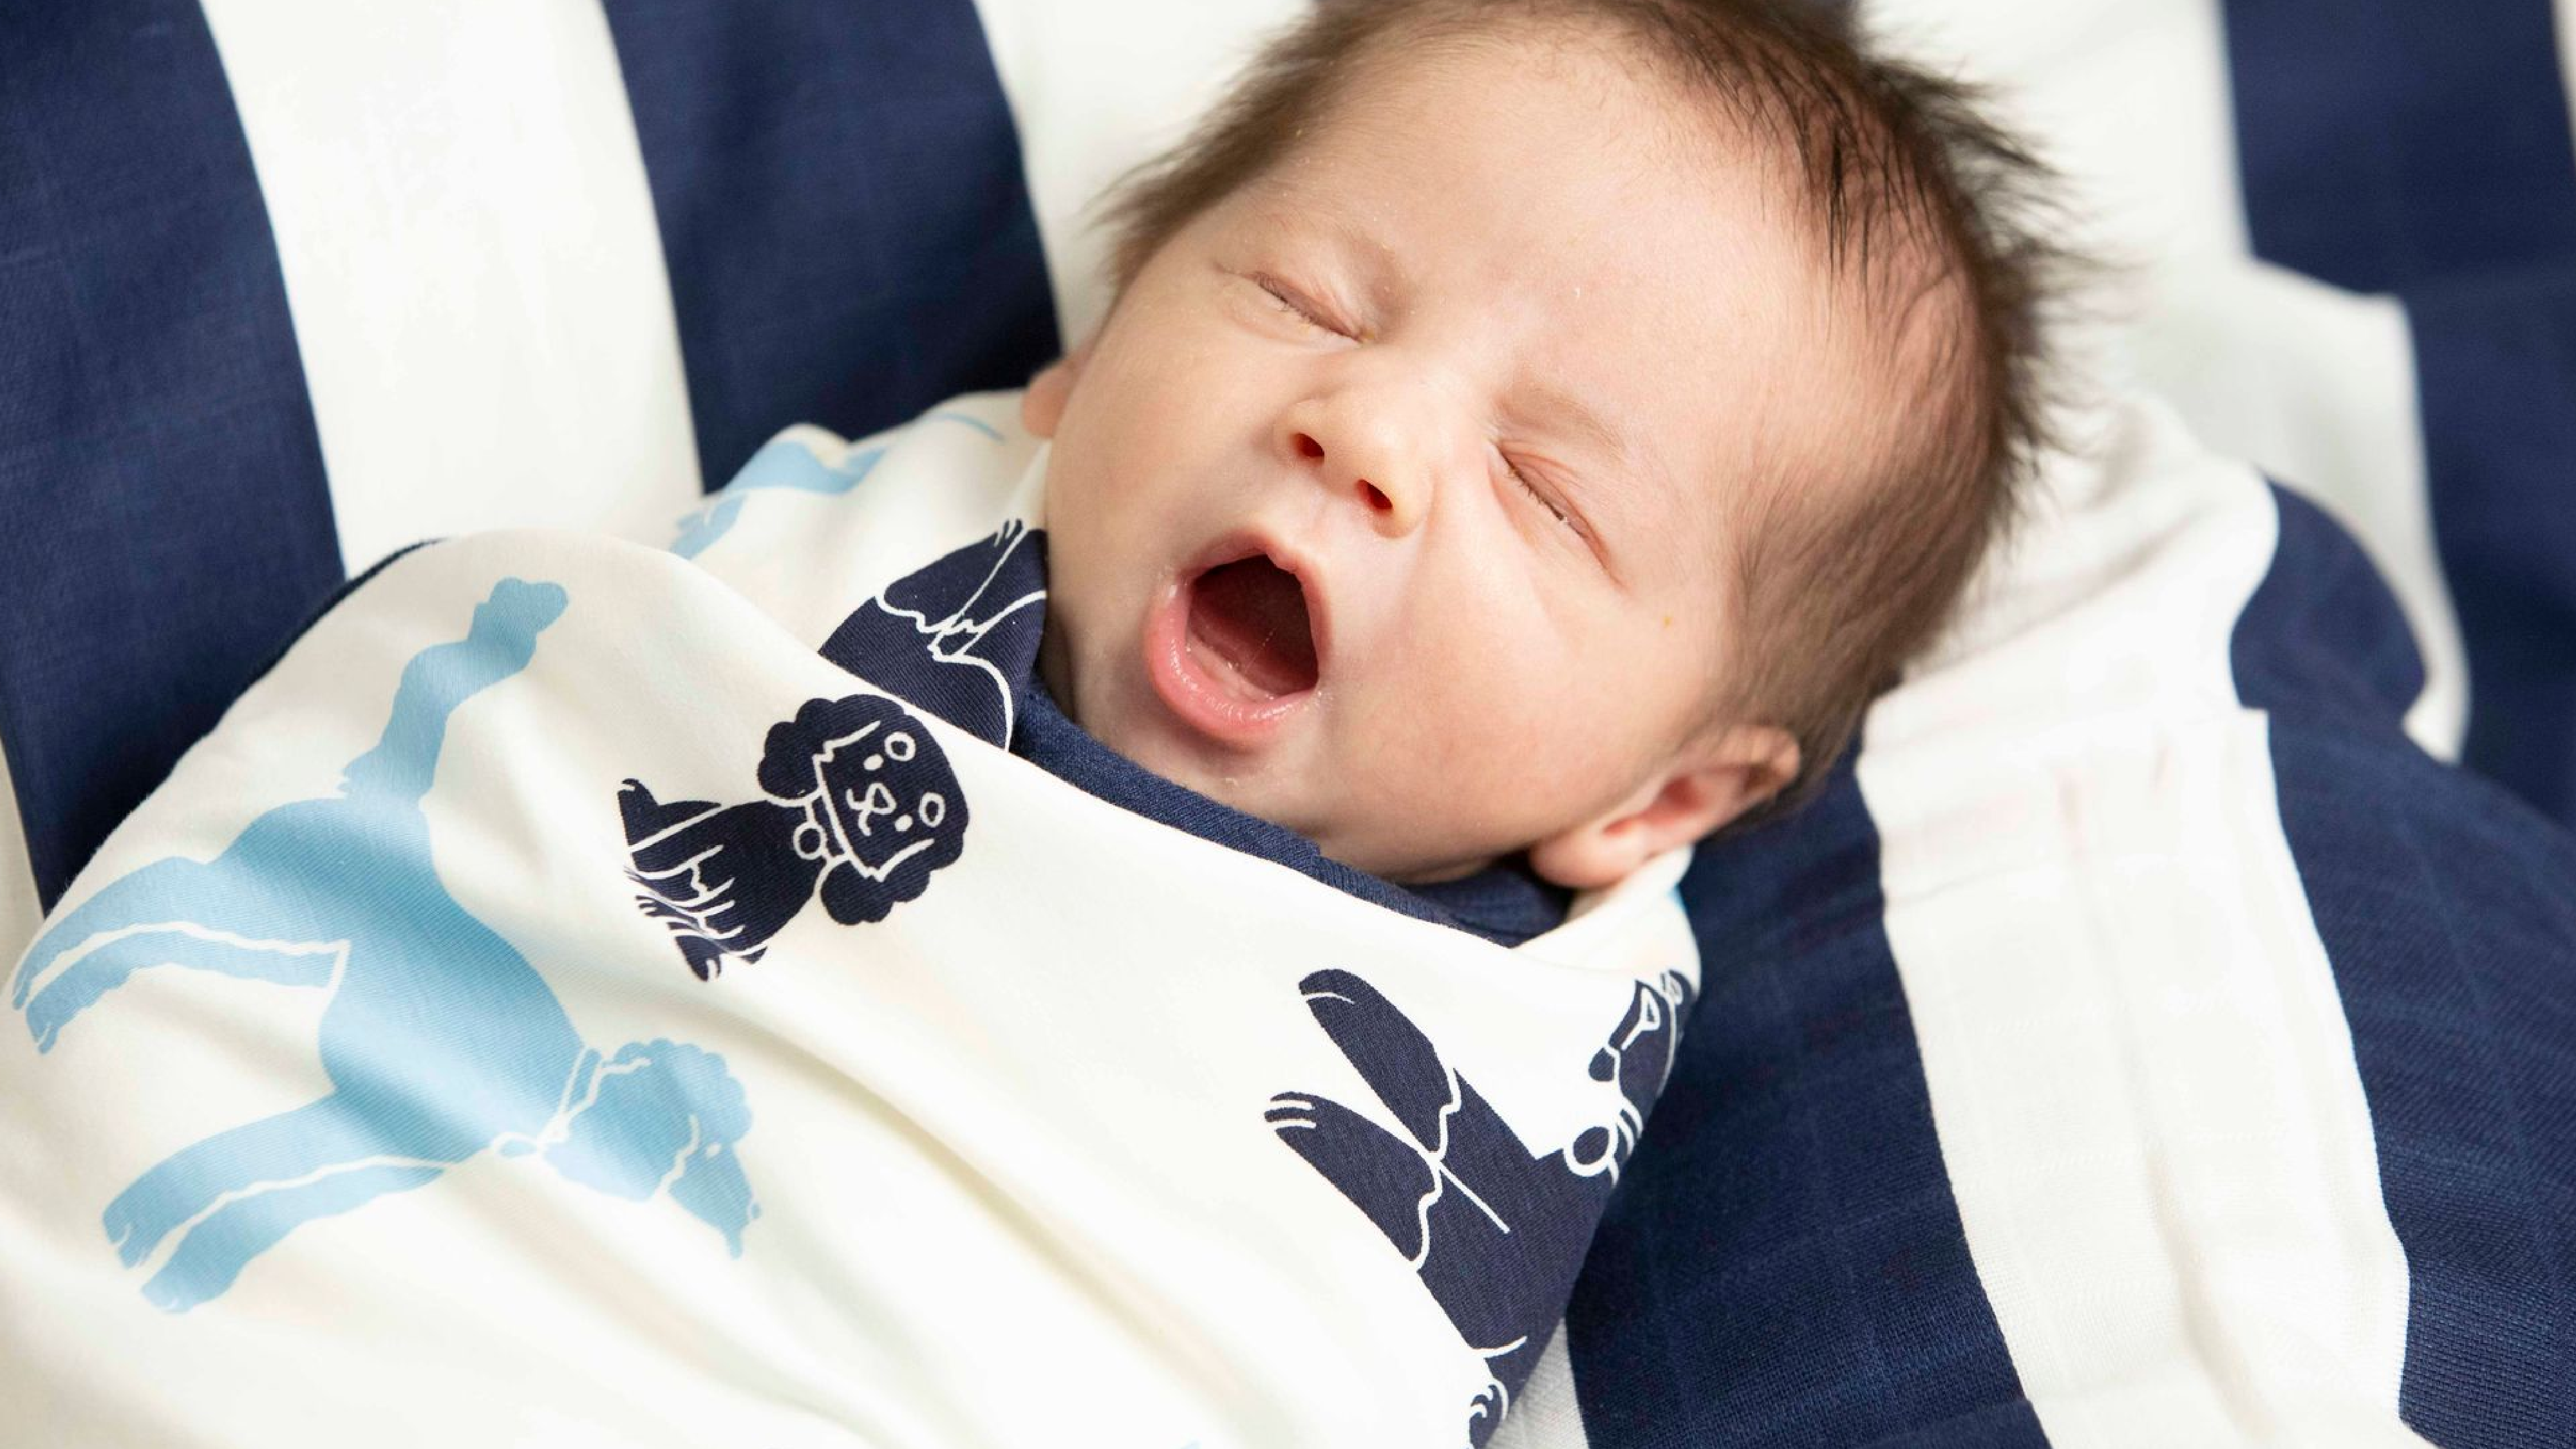 When Can Babies Sleep With a Blanket?